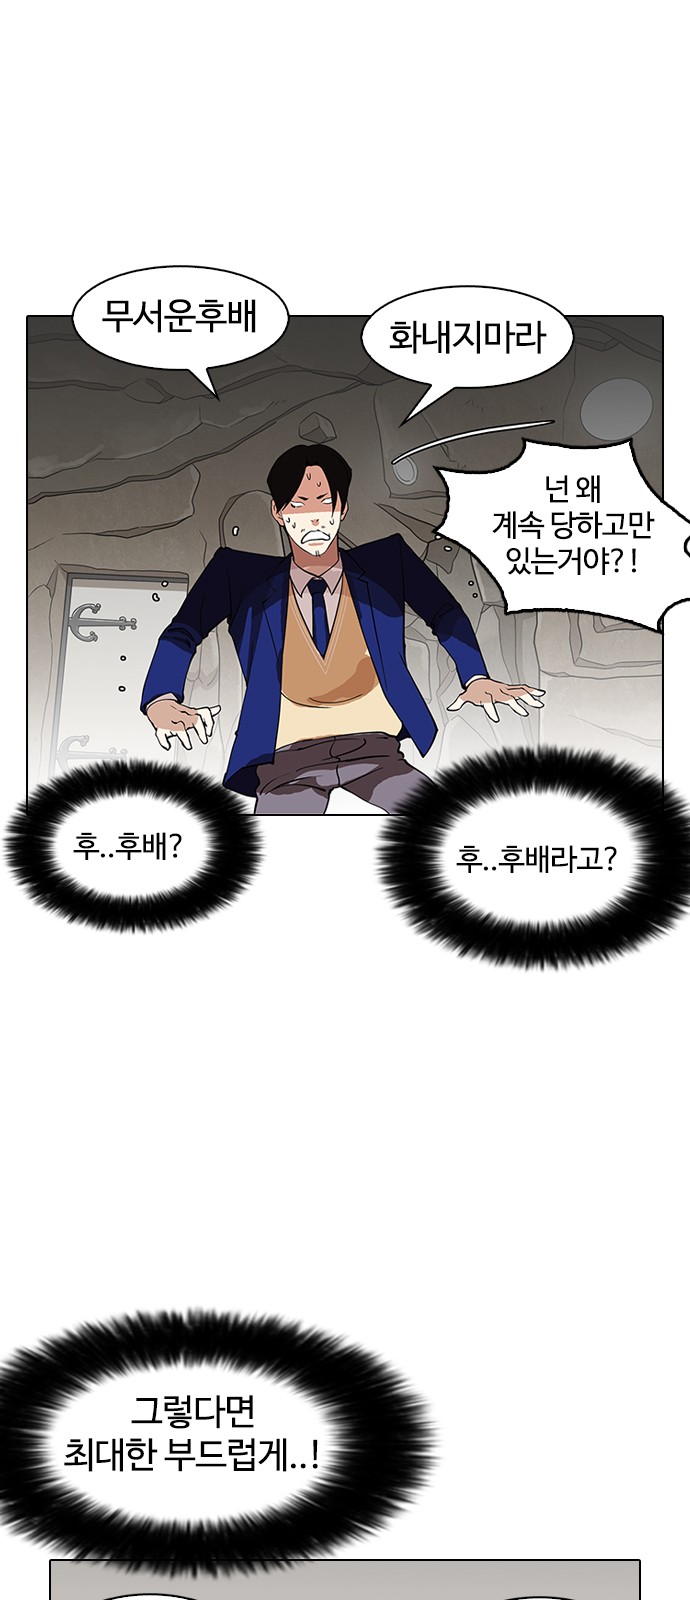 Lookism - Chapter 147 - Page 3